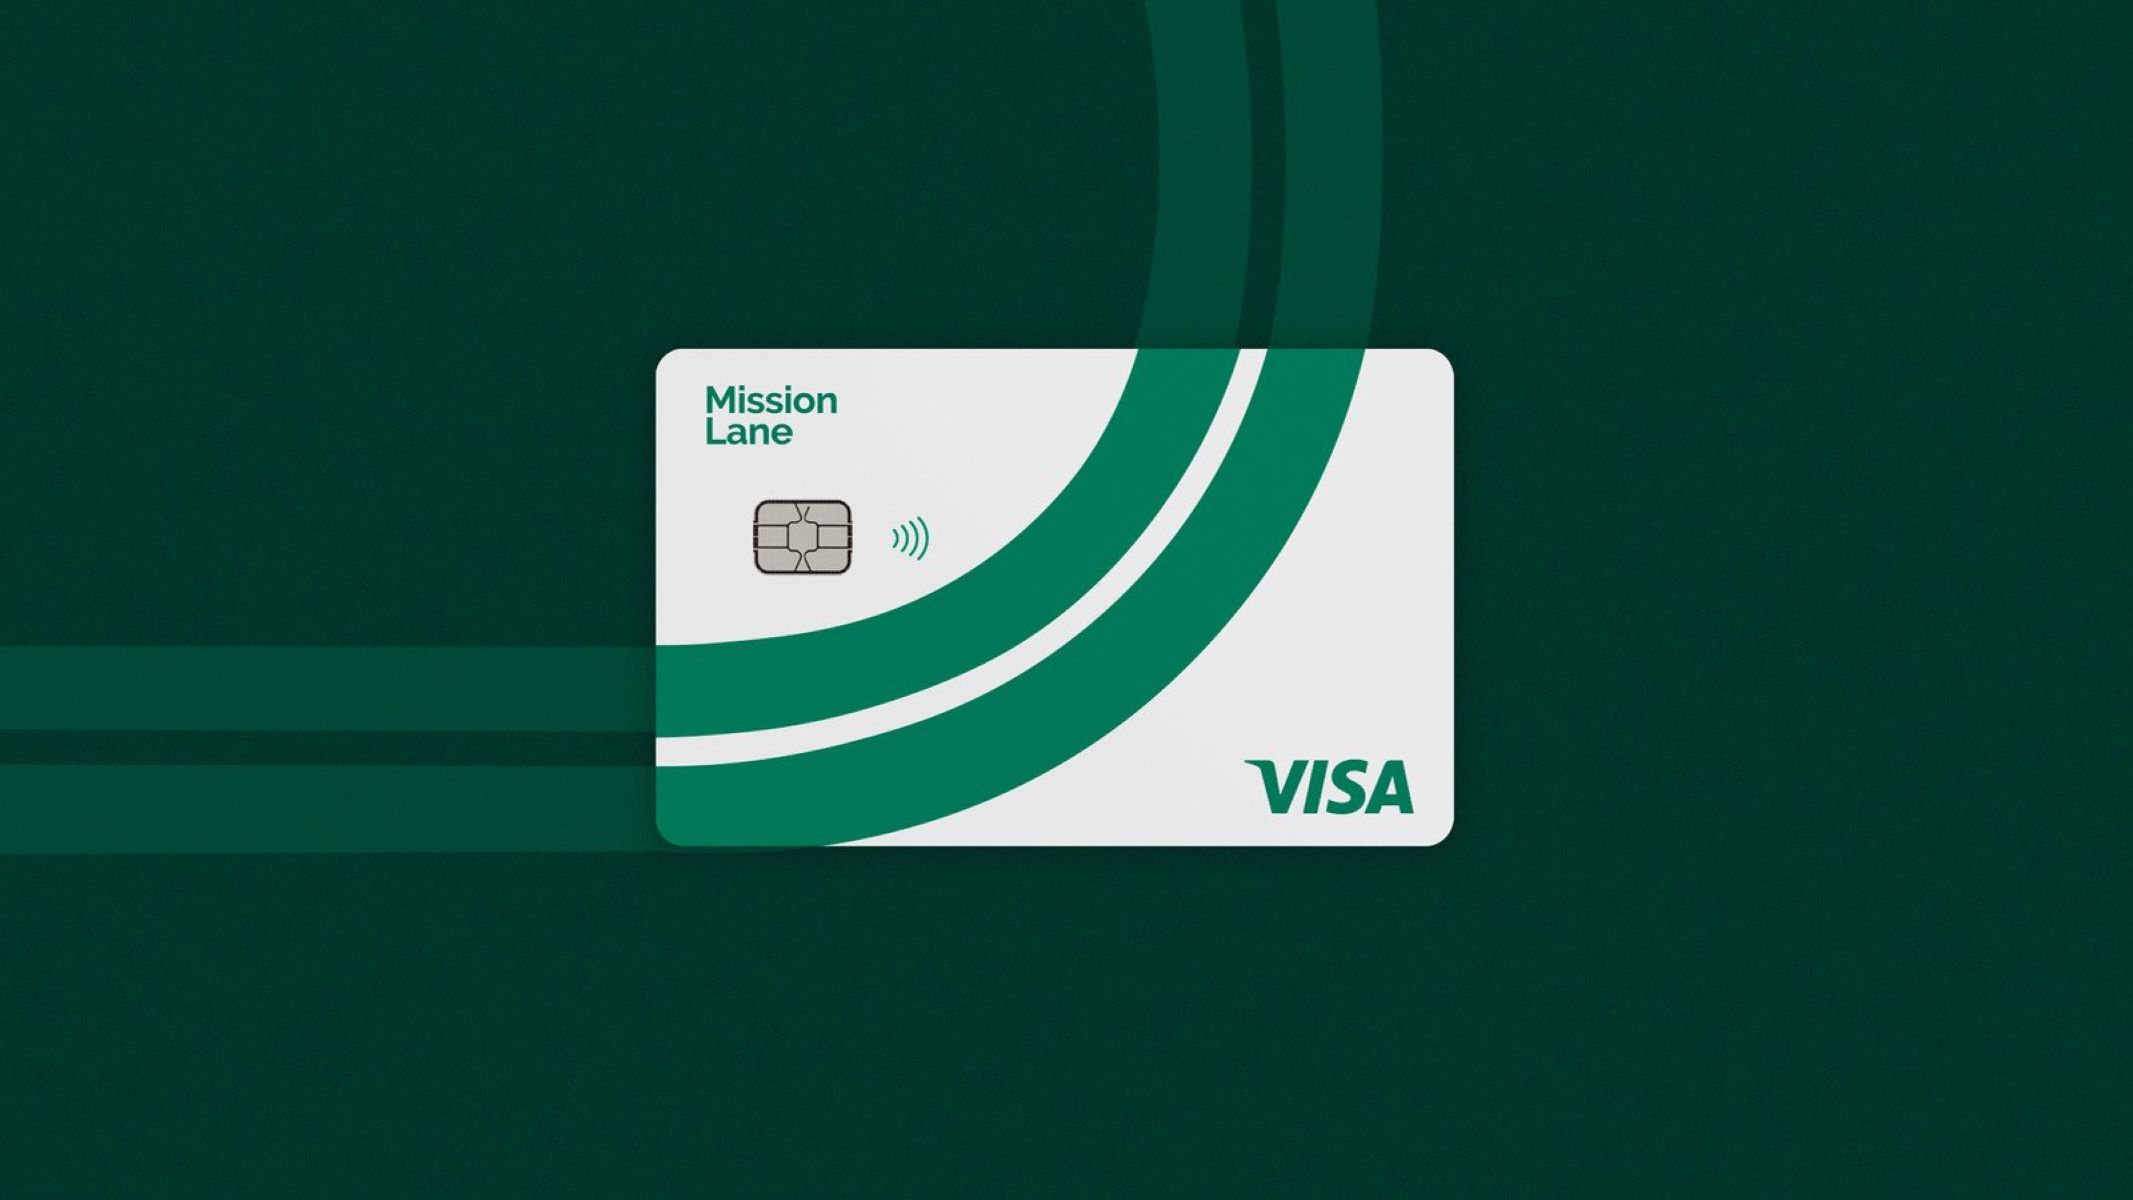 How To Activate Mission Lane Credit Card